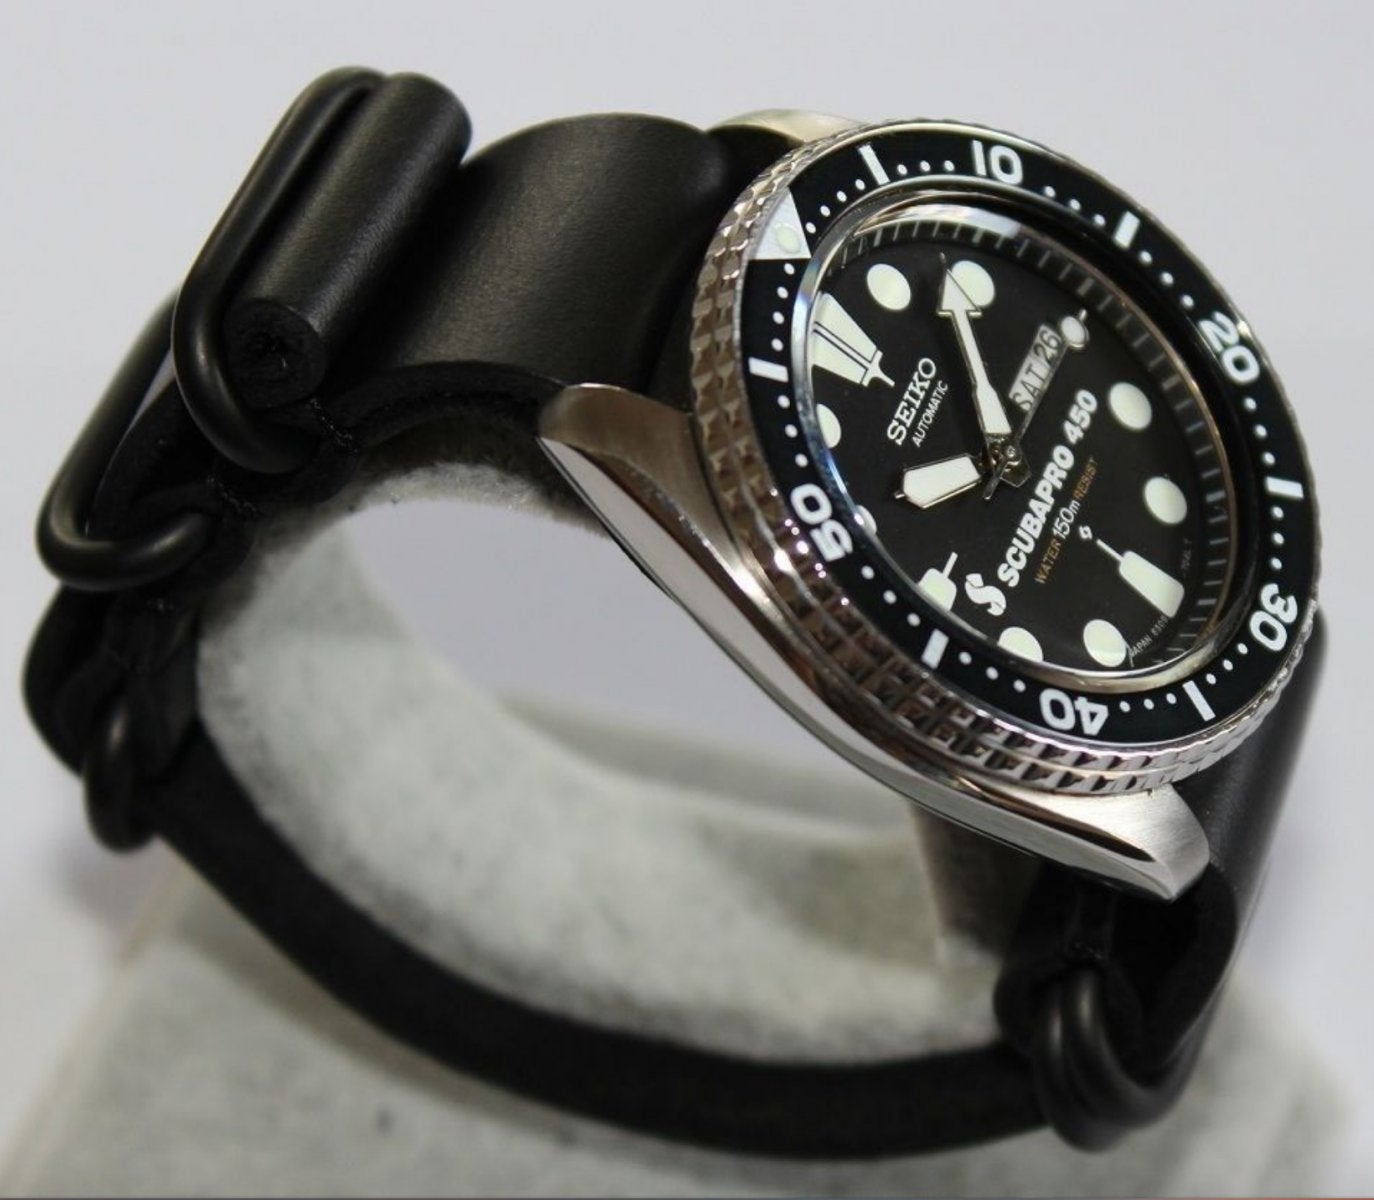 Is this Seiko ScubaPro watch original? | The Watch Site